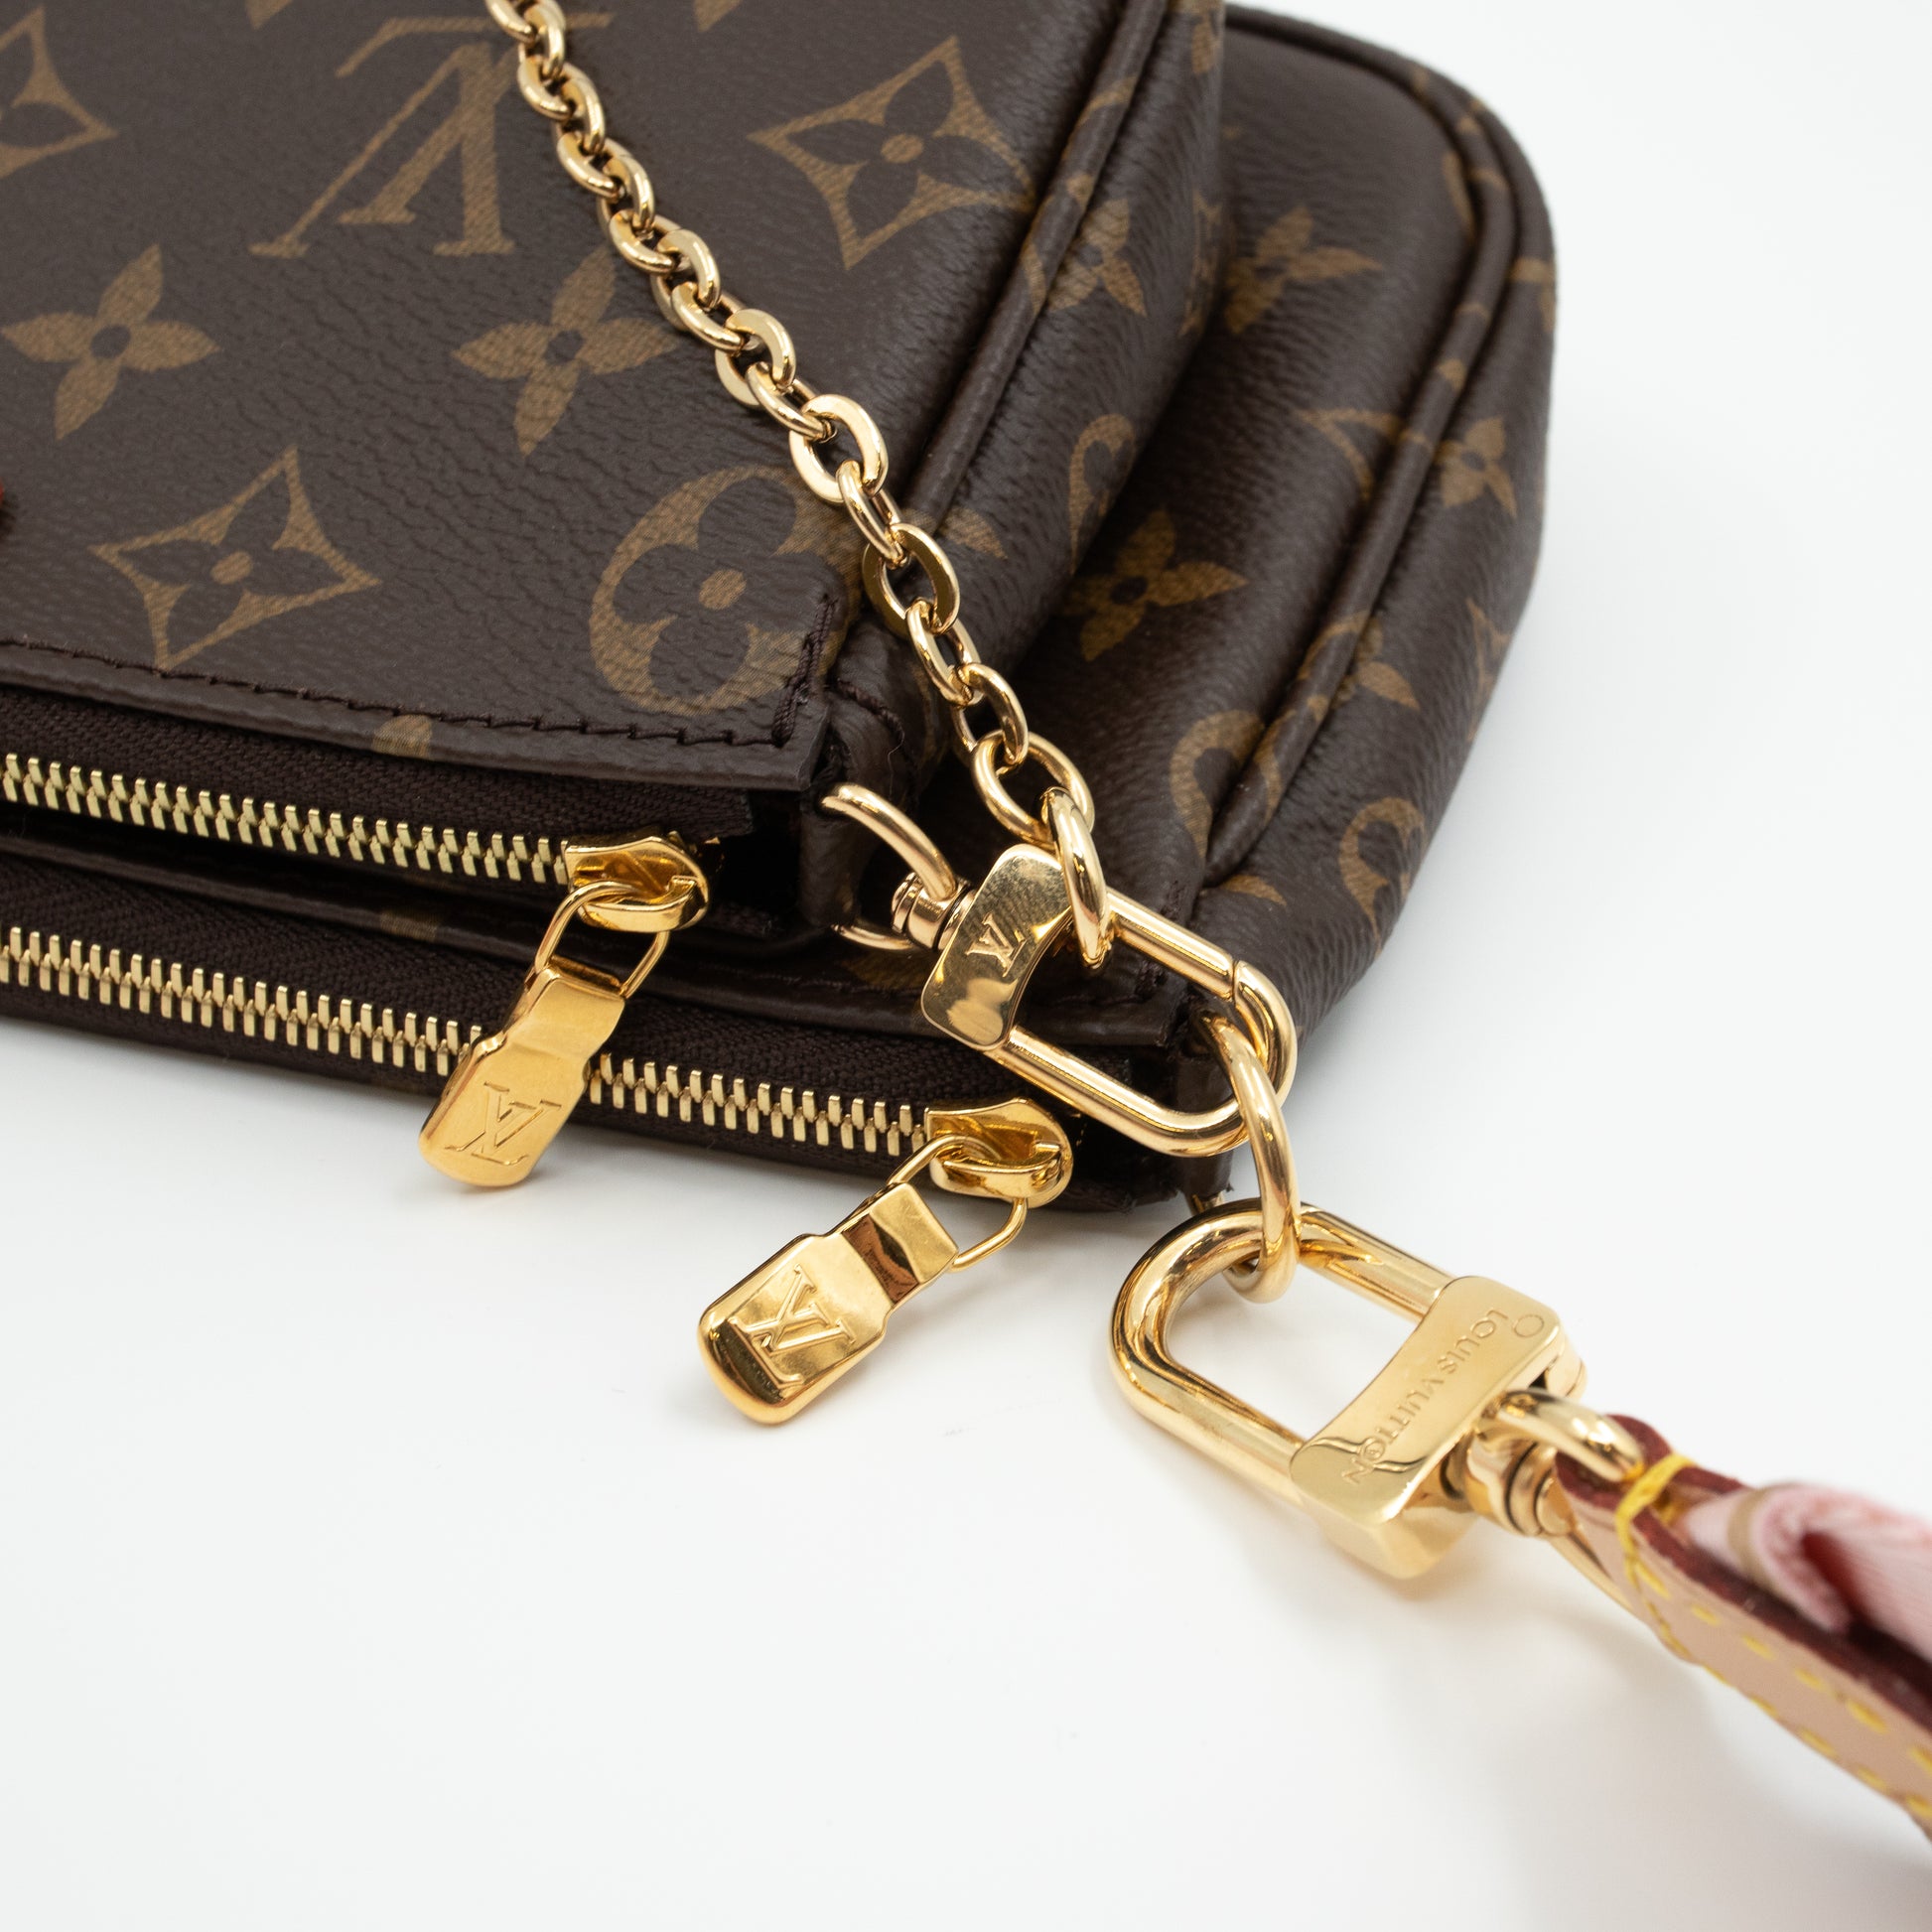 How To Double Strap Your Louis Vuitton Pochette Accessoires - With